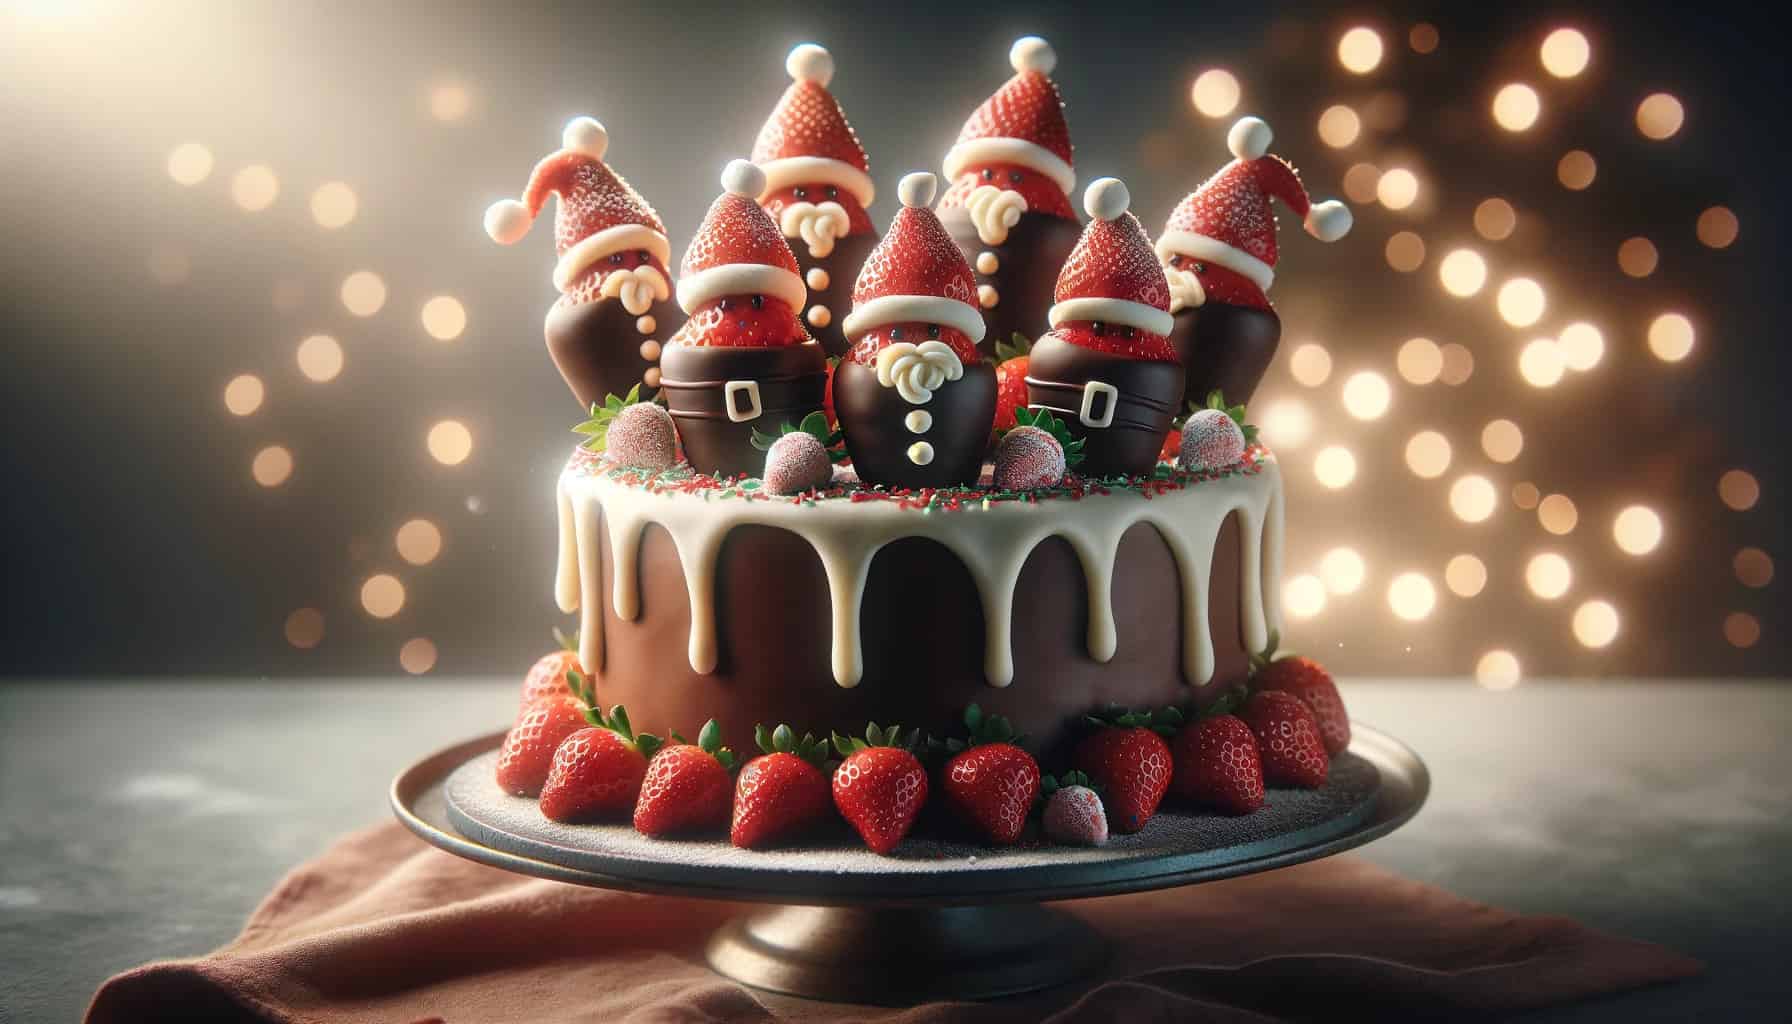 Christmas cake topped with chocolate-covered strawberries dressed as mini santas.